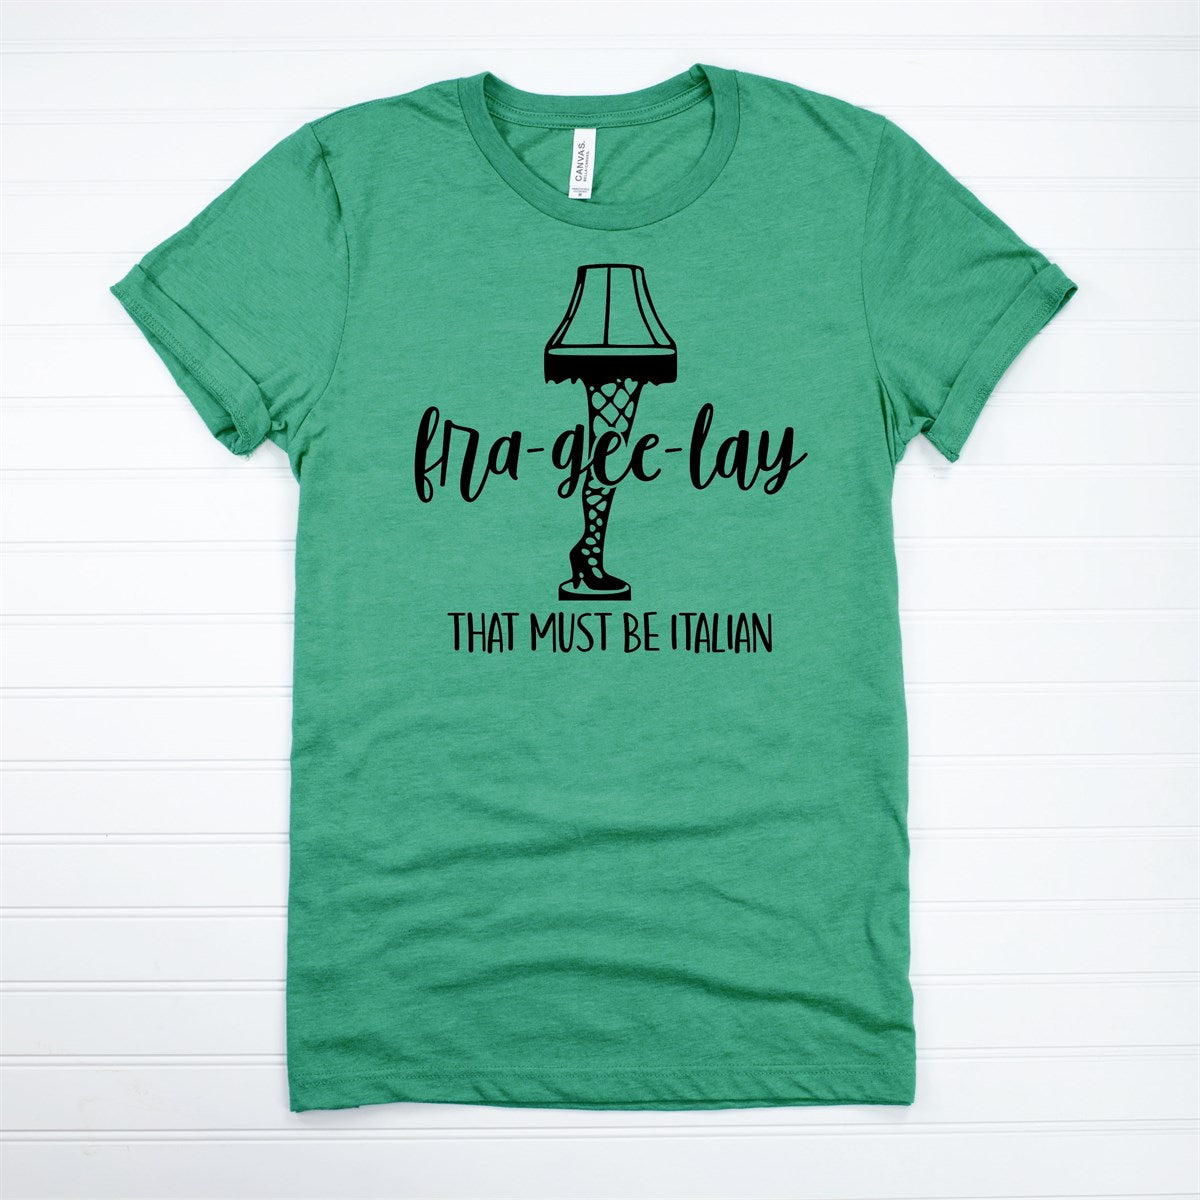 Fra-Gee-Lay That Must Be Italian Tee